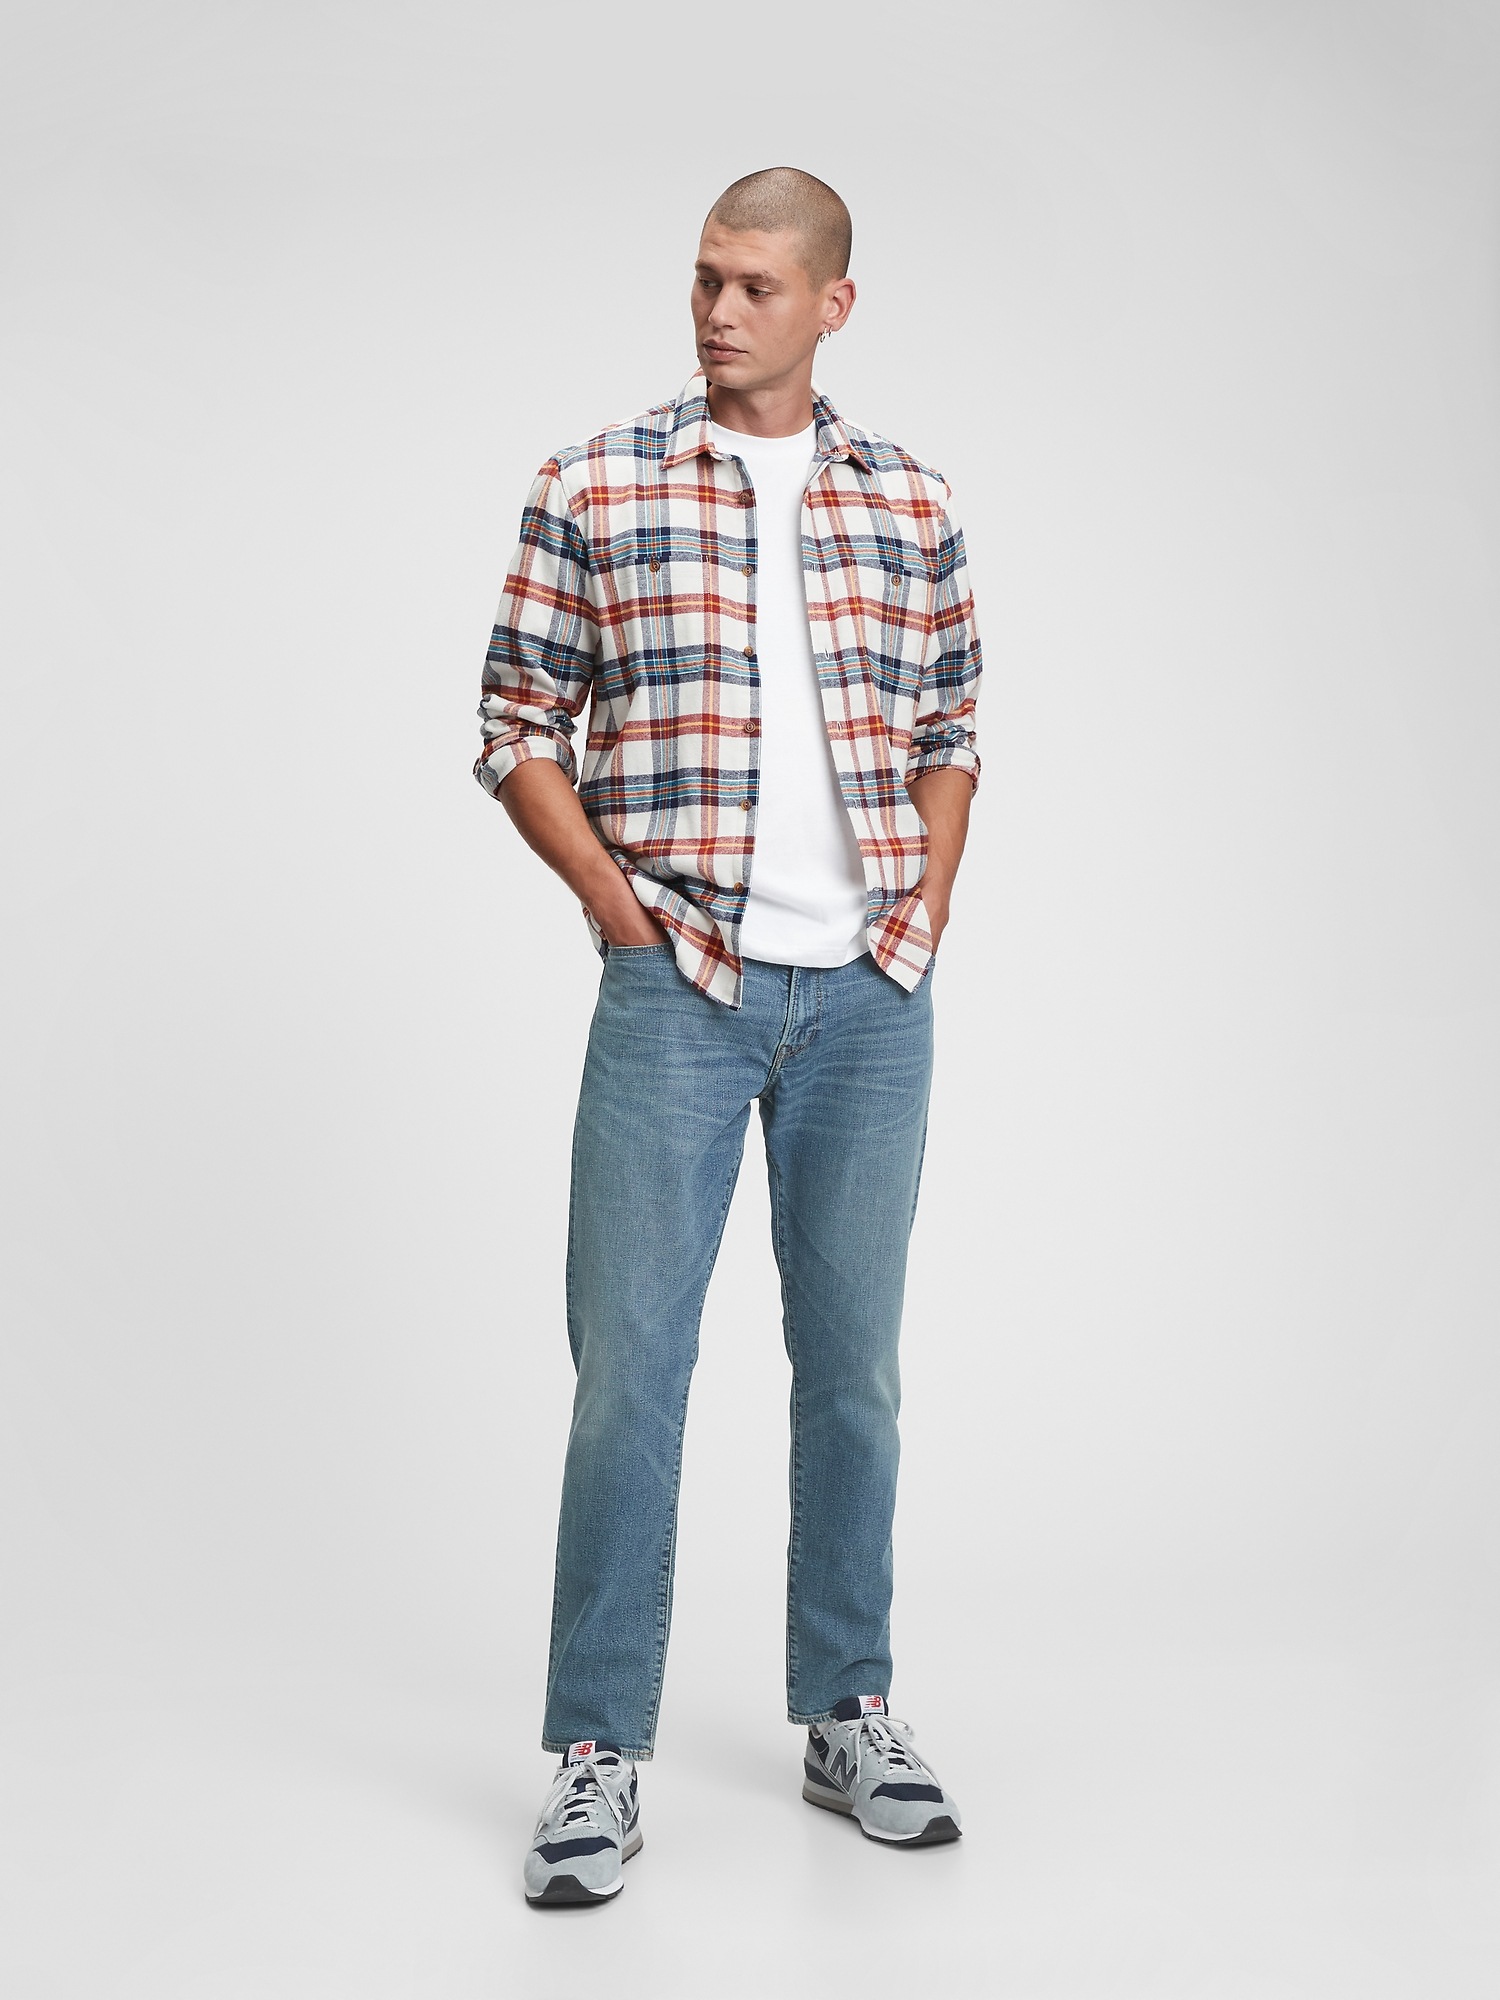 Flannel Shirt in Untucked Fit | Gap Factory